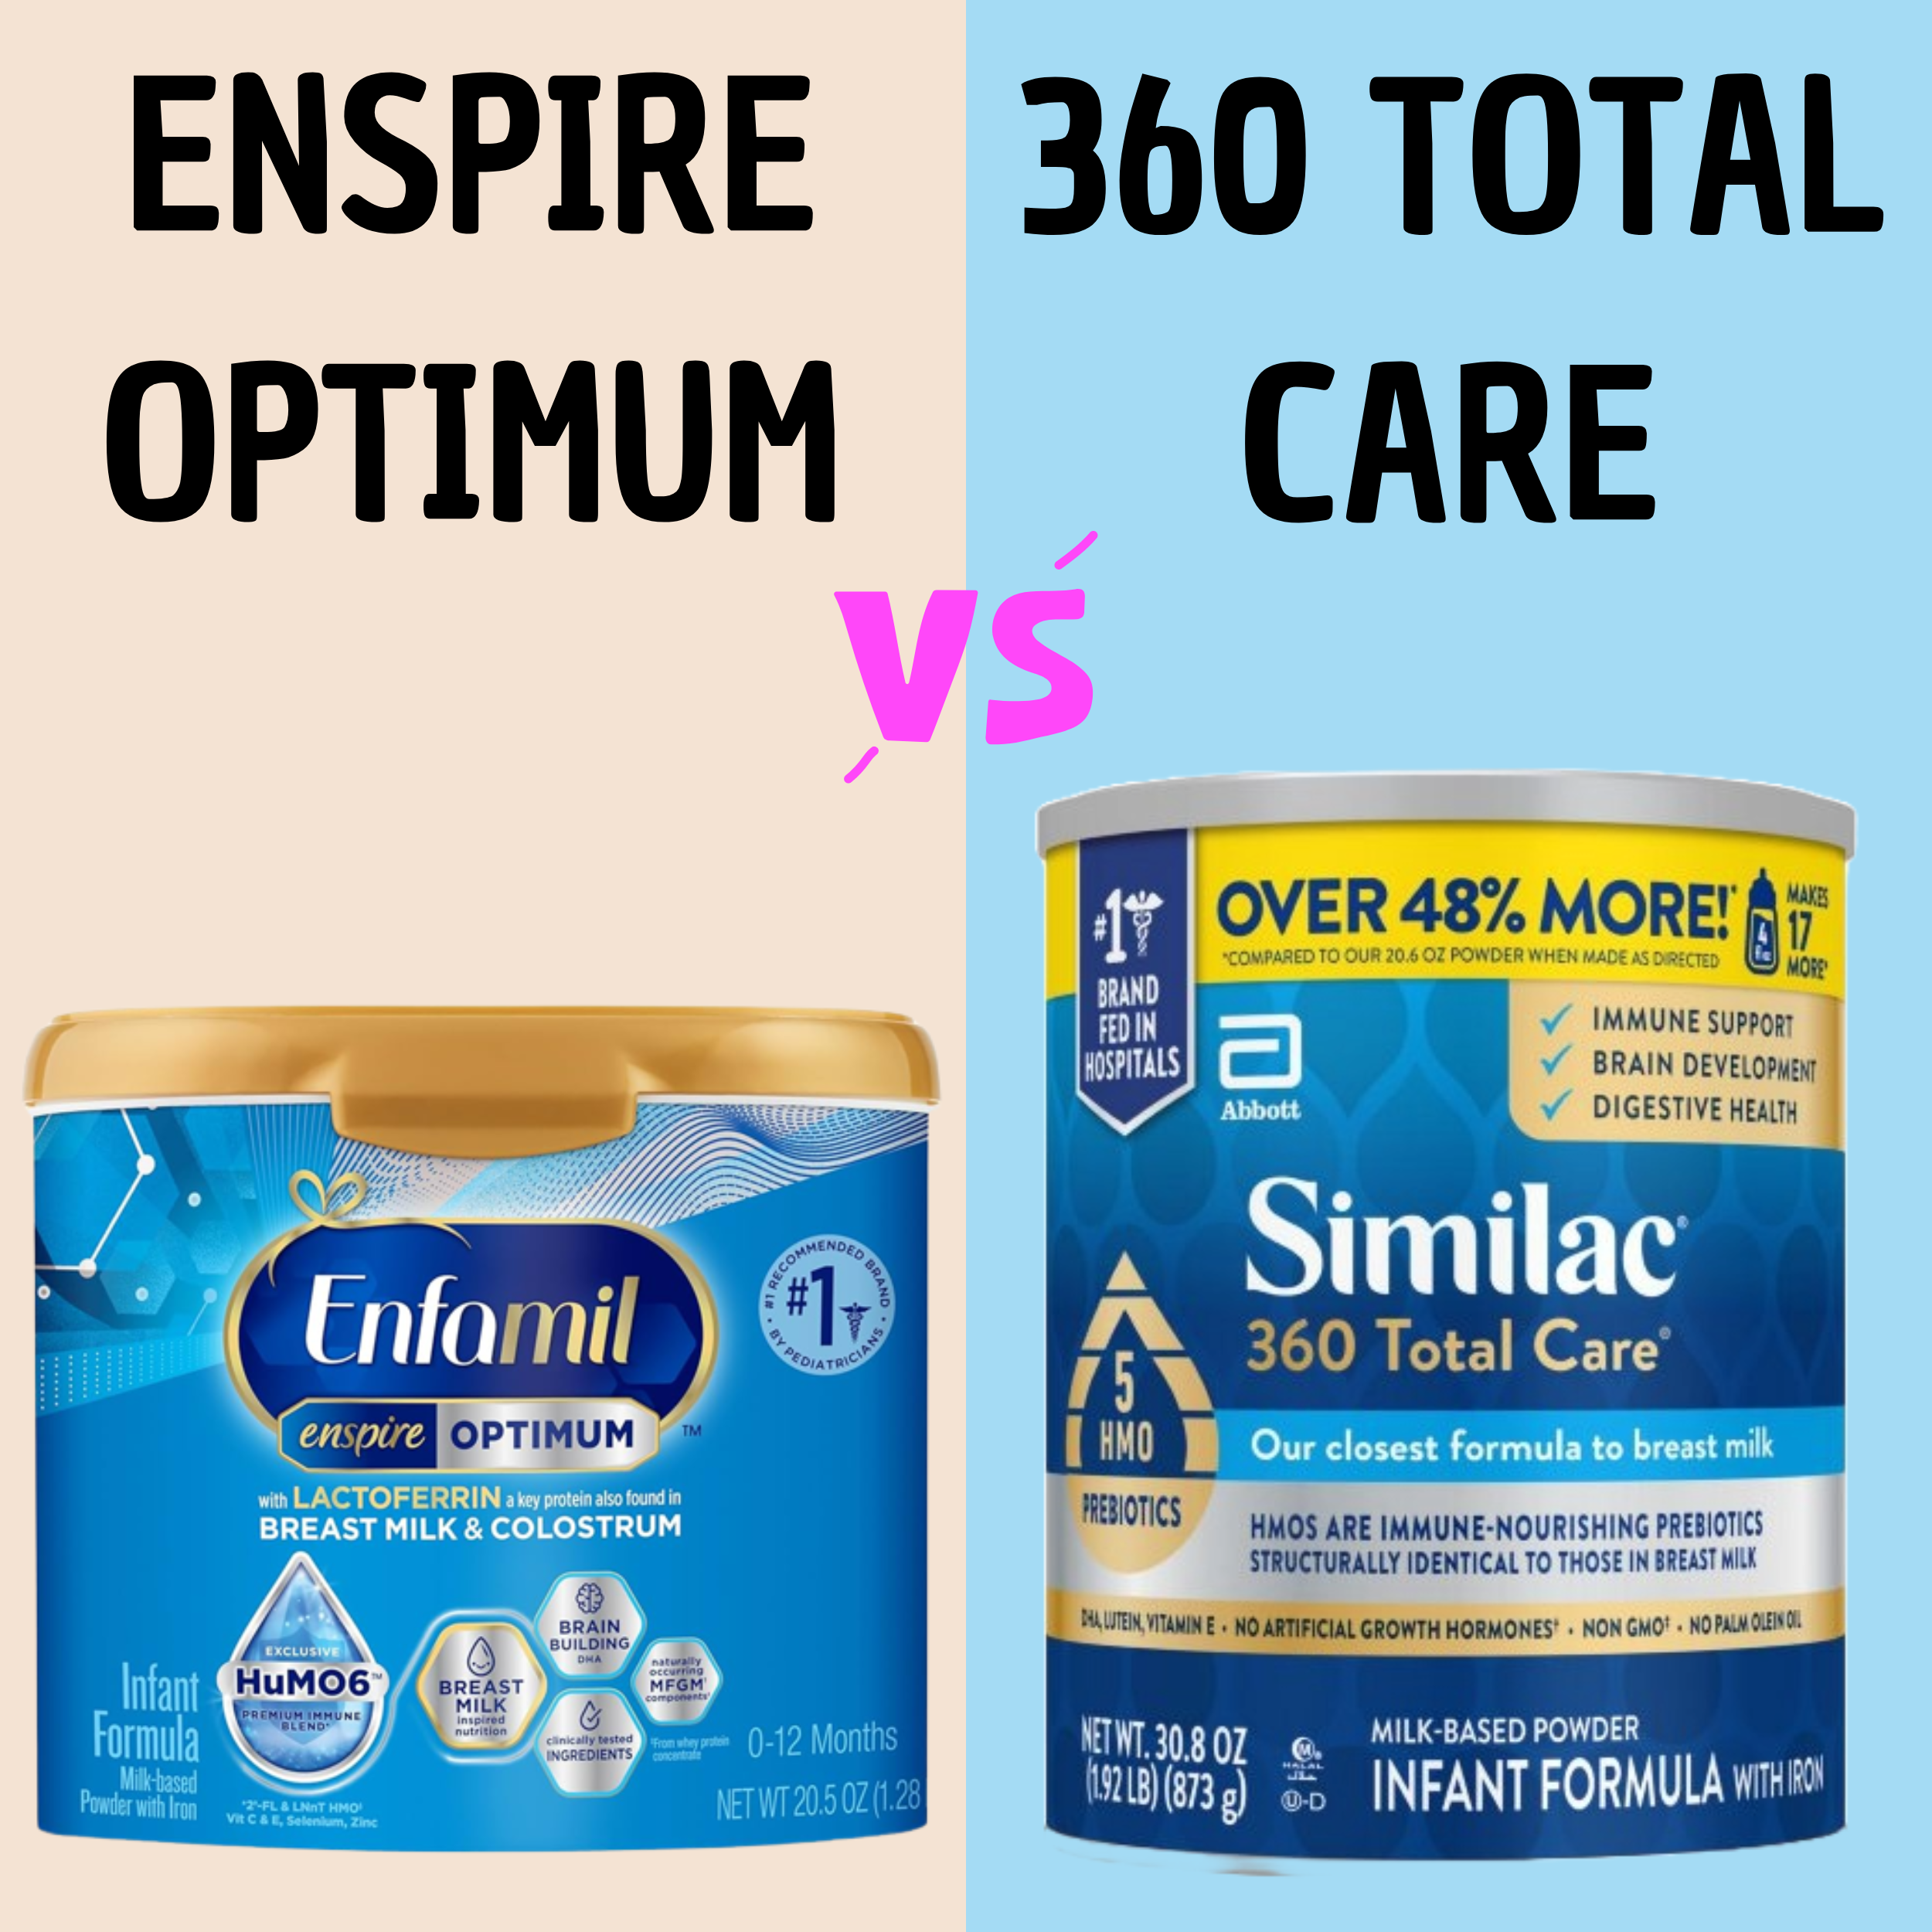 You are currently viewing Enfamil Enspire Optimum Vs Similac 360 Total Care: Full Comparison